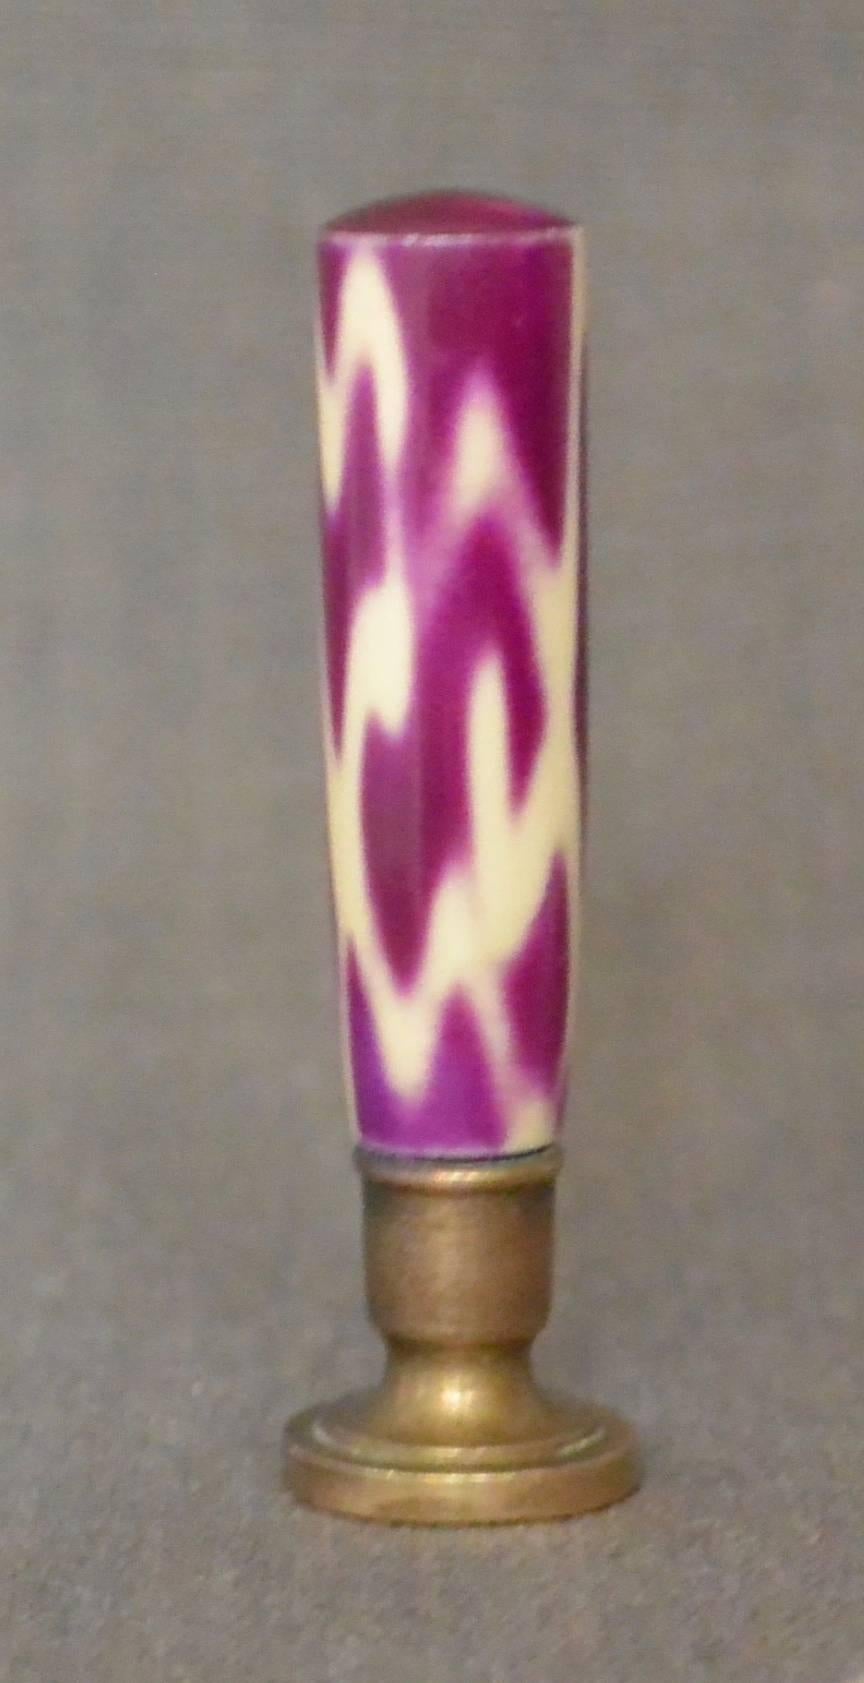 Italian wax seal stamp. Rich magenta and white pattern porcelain and brass stamp. Italy, late 19th century.
Dimension: 1.88